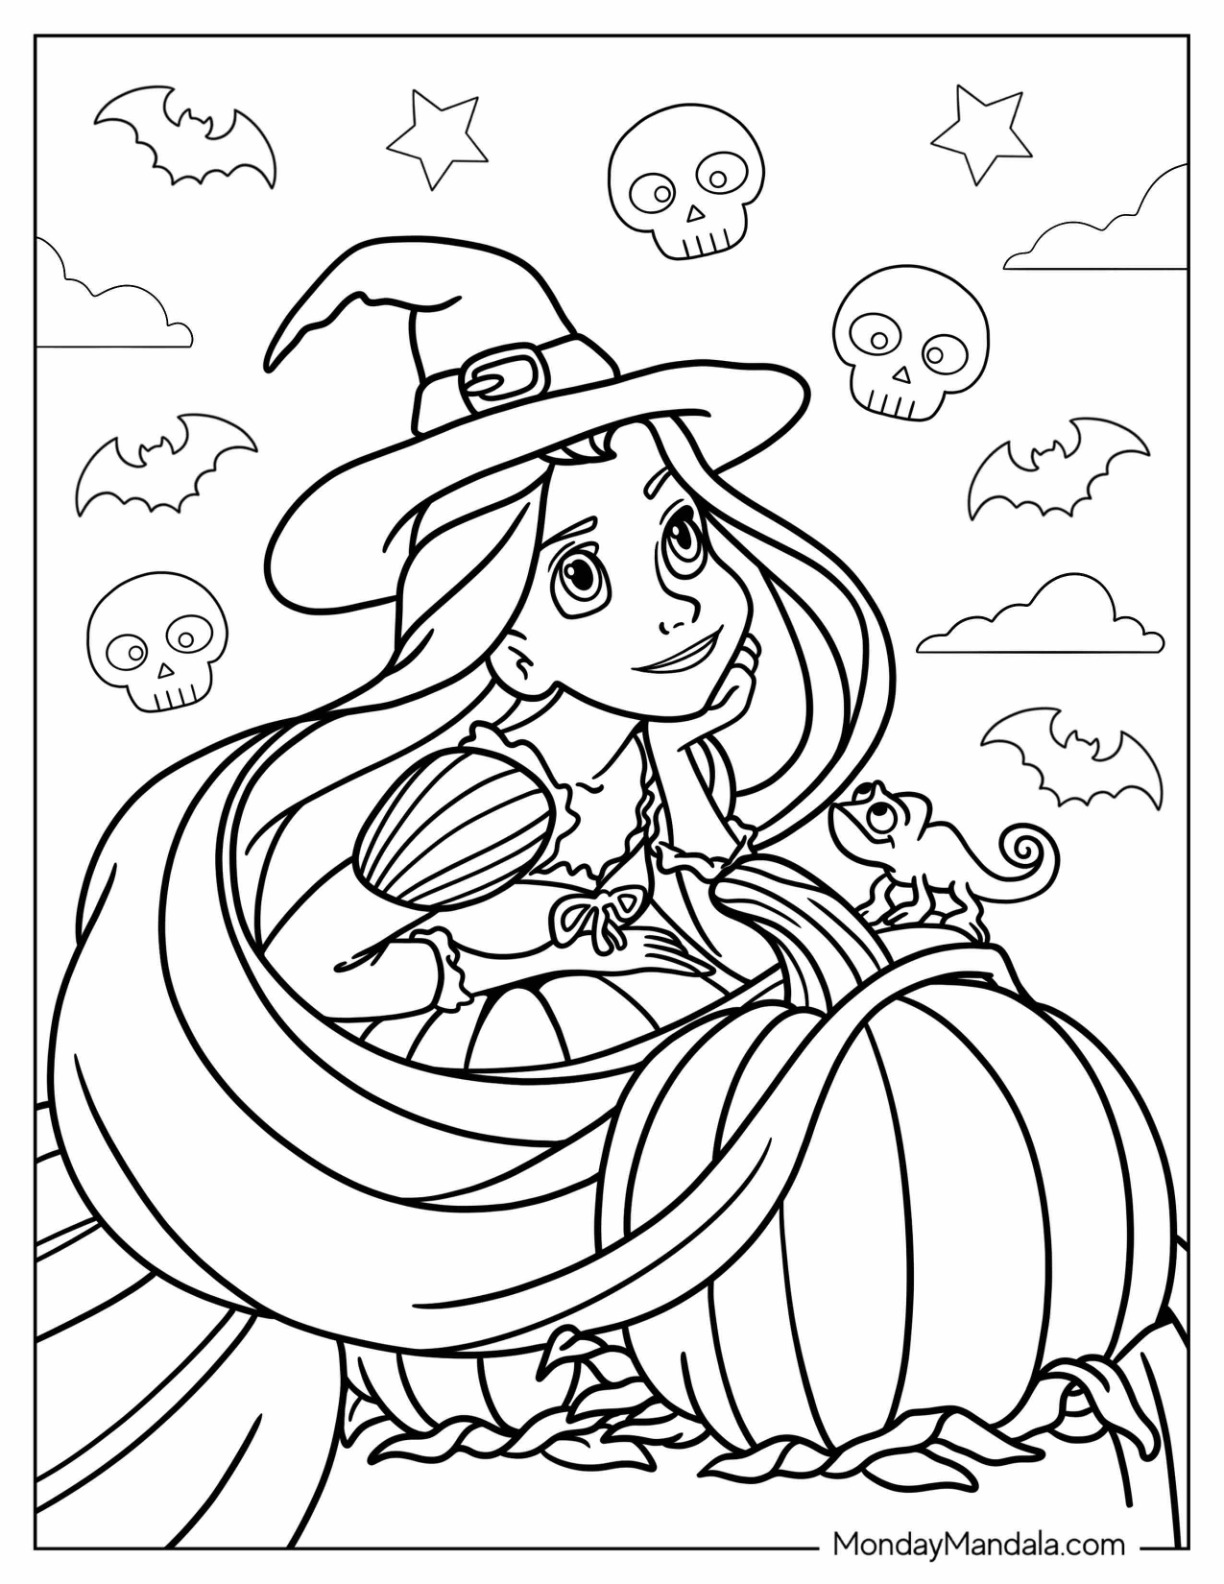 37 Disney Halloween Coloring Pages Printable 33